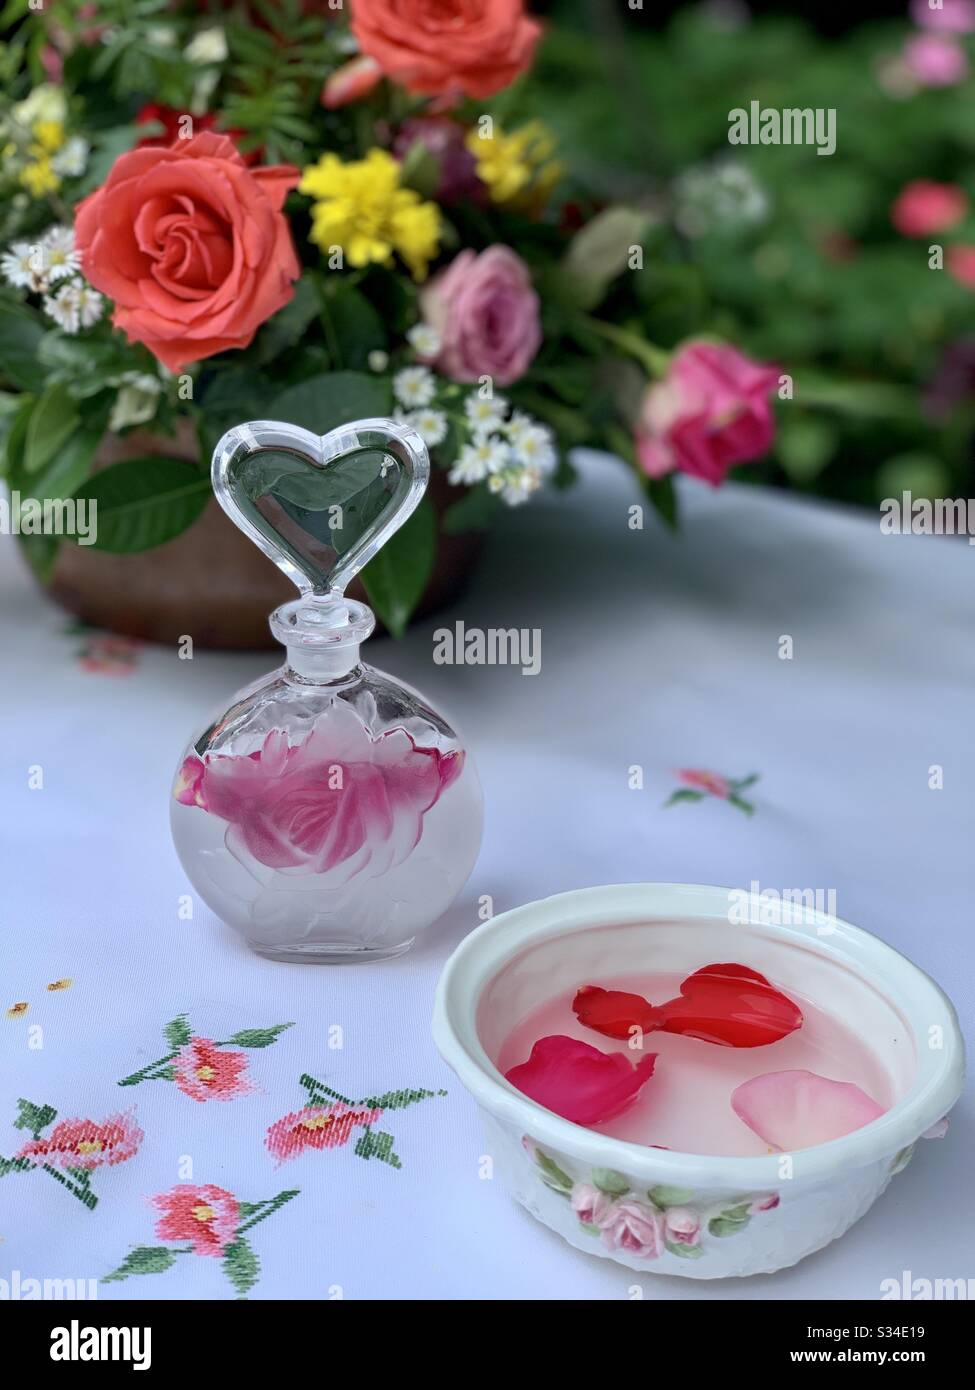 The delicate beauty of a charming perfume bottle filled with rose water. A bone China ramekin is filled with the rose petals and water that perfumes the air and the hands. Dainty linen and roses. Stock Photo